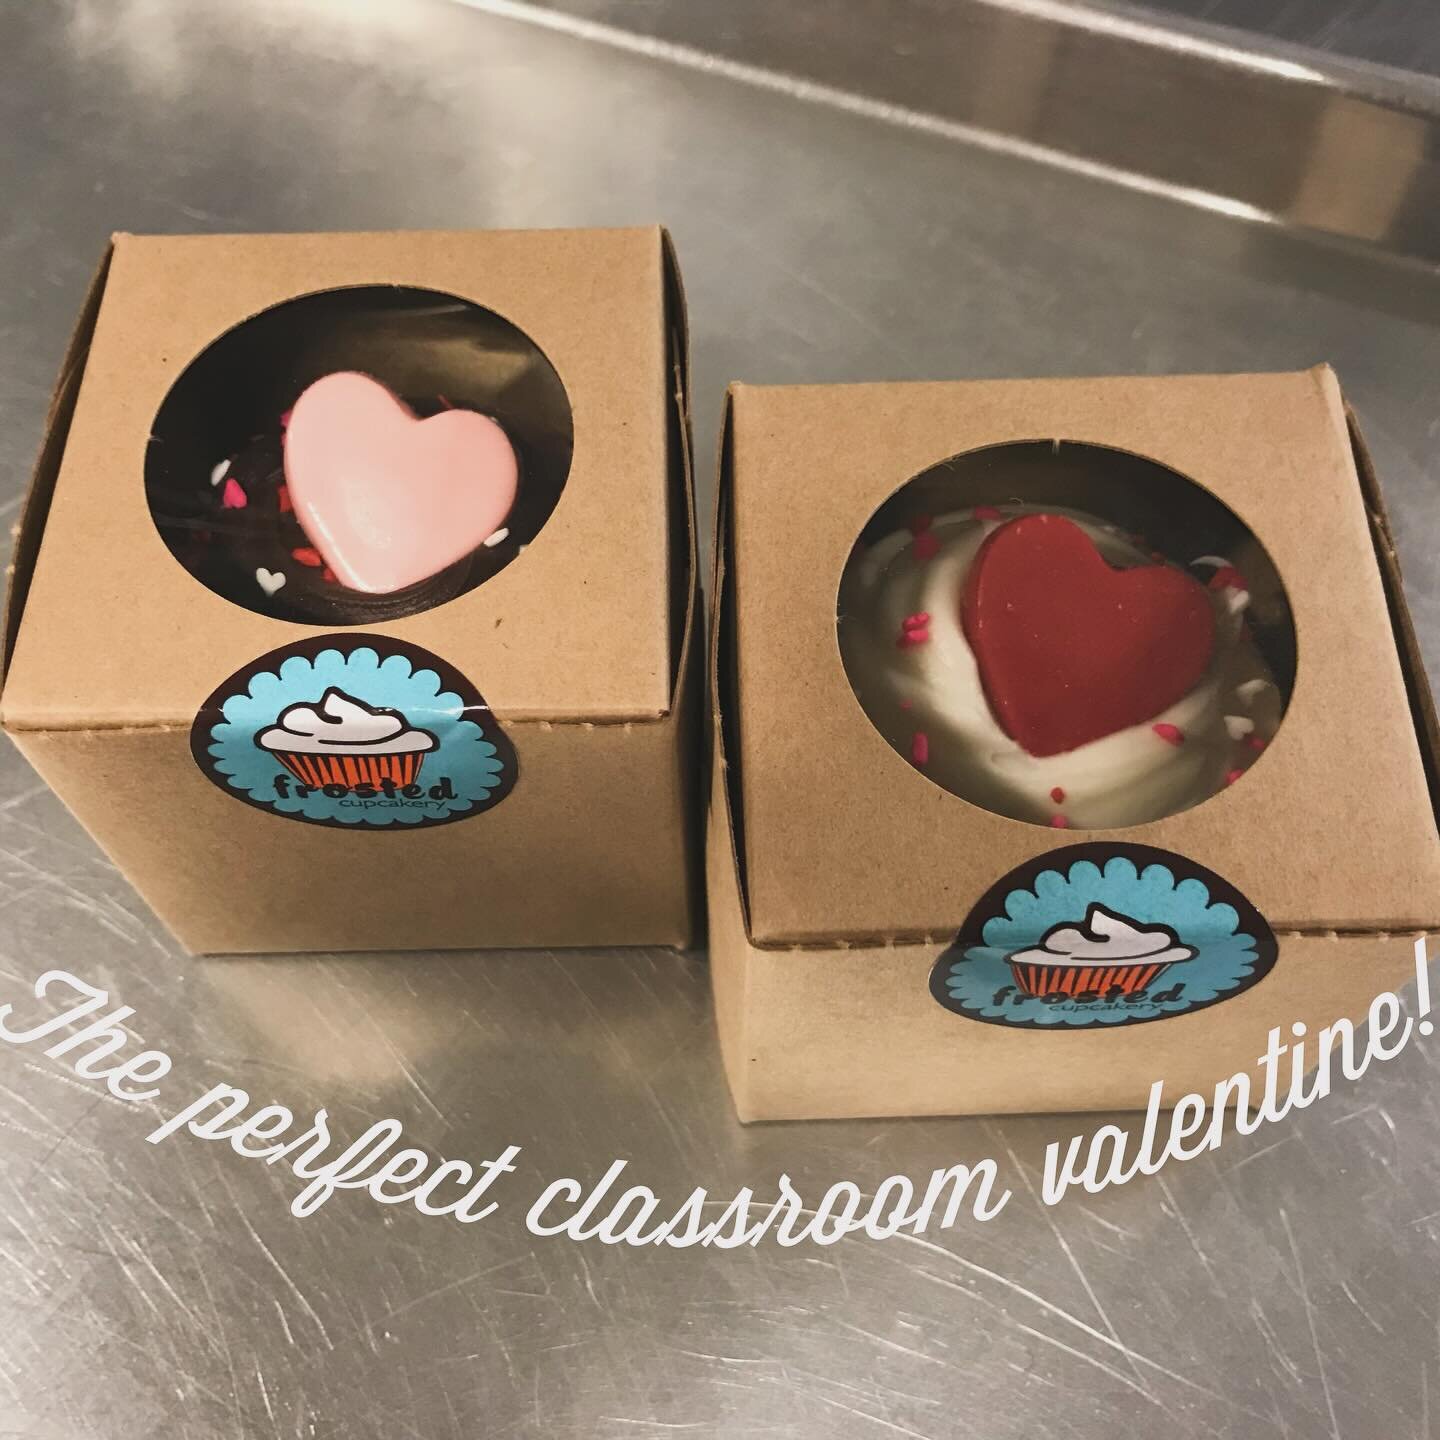 Just a friendly reminder, our mini cupcakes or hi-top cupcake sandwiches boxed individually make such a fun classroom or office valentine! #valentineday #cupcakes #heartseverywhere #frostedcupcakery